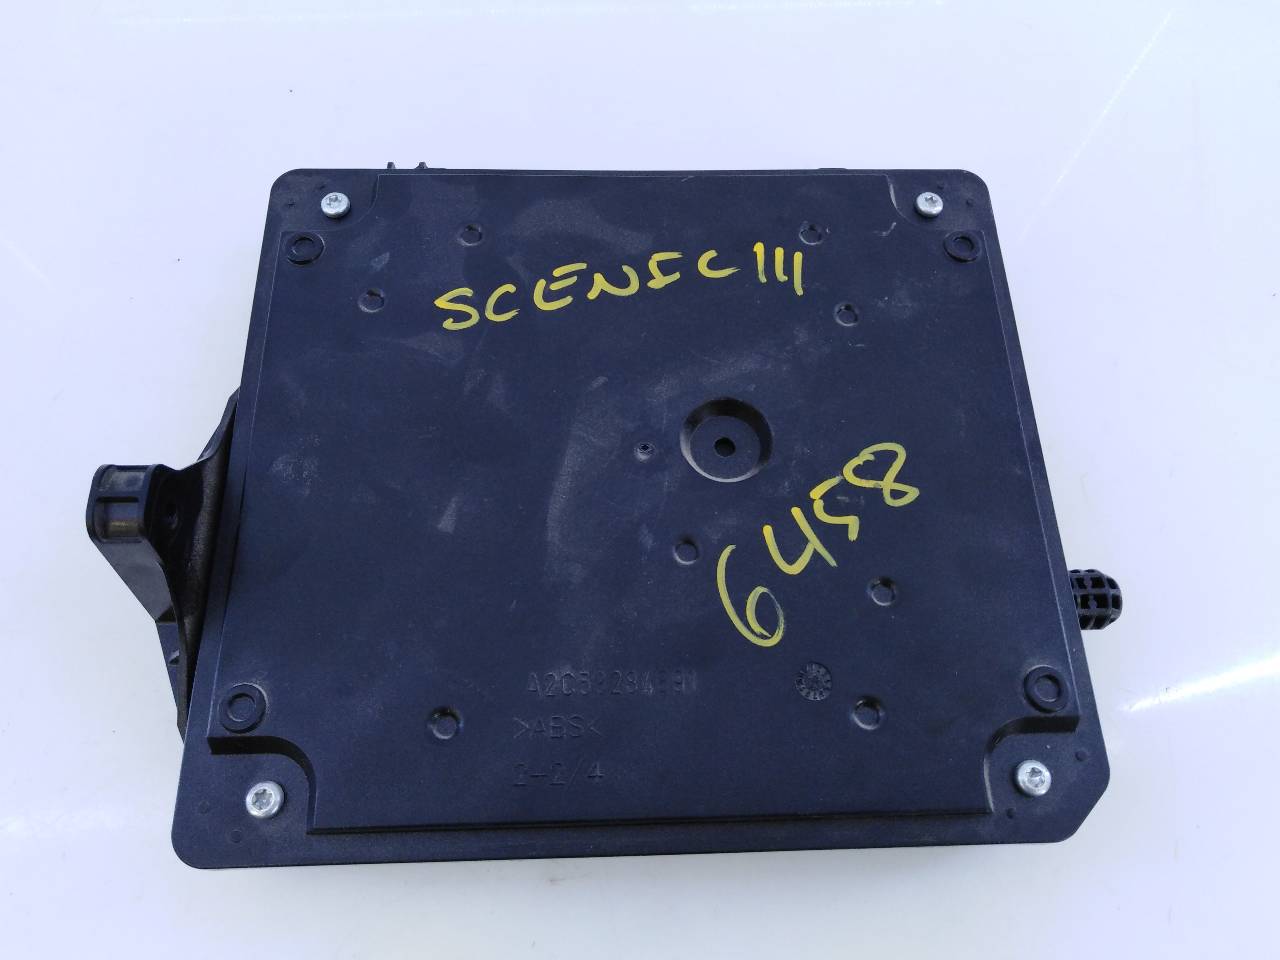 RENAULT Scenic 3 generation (2009-2015) Other Control Units A2C53284891, E2-A1-43-5 18711077